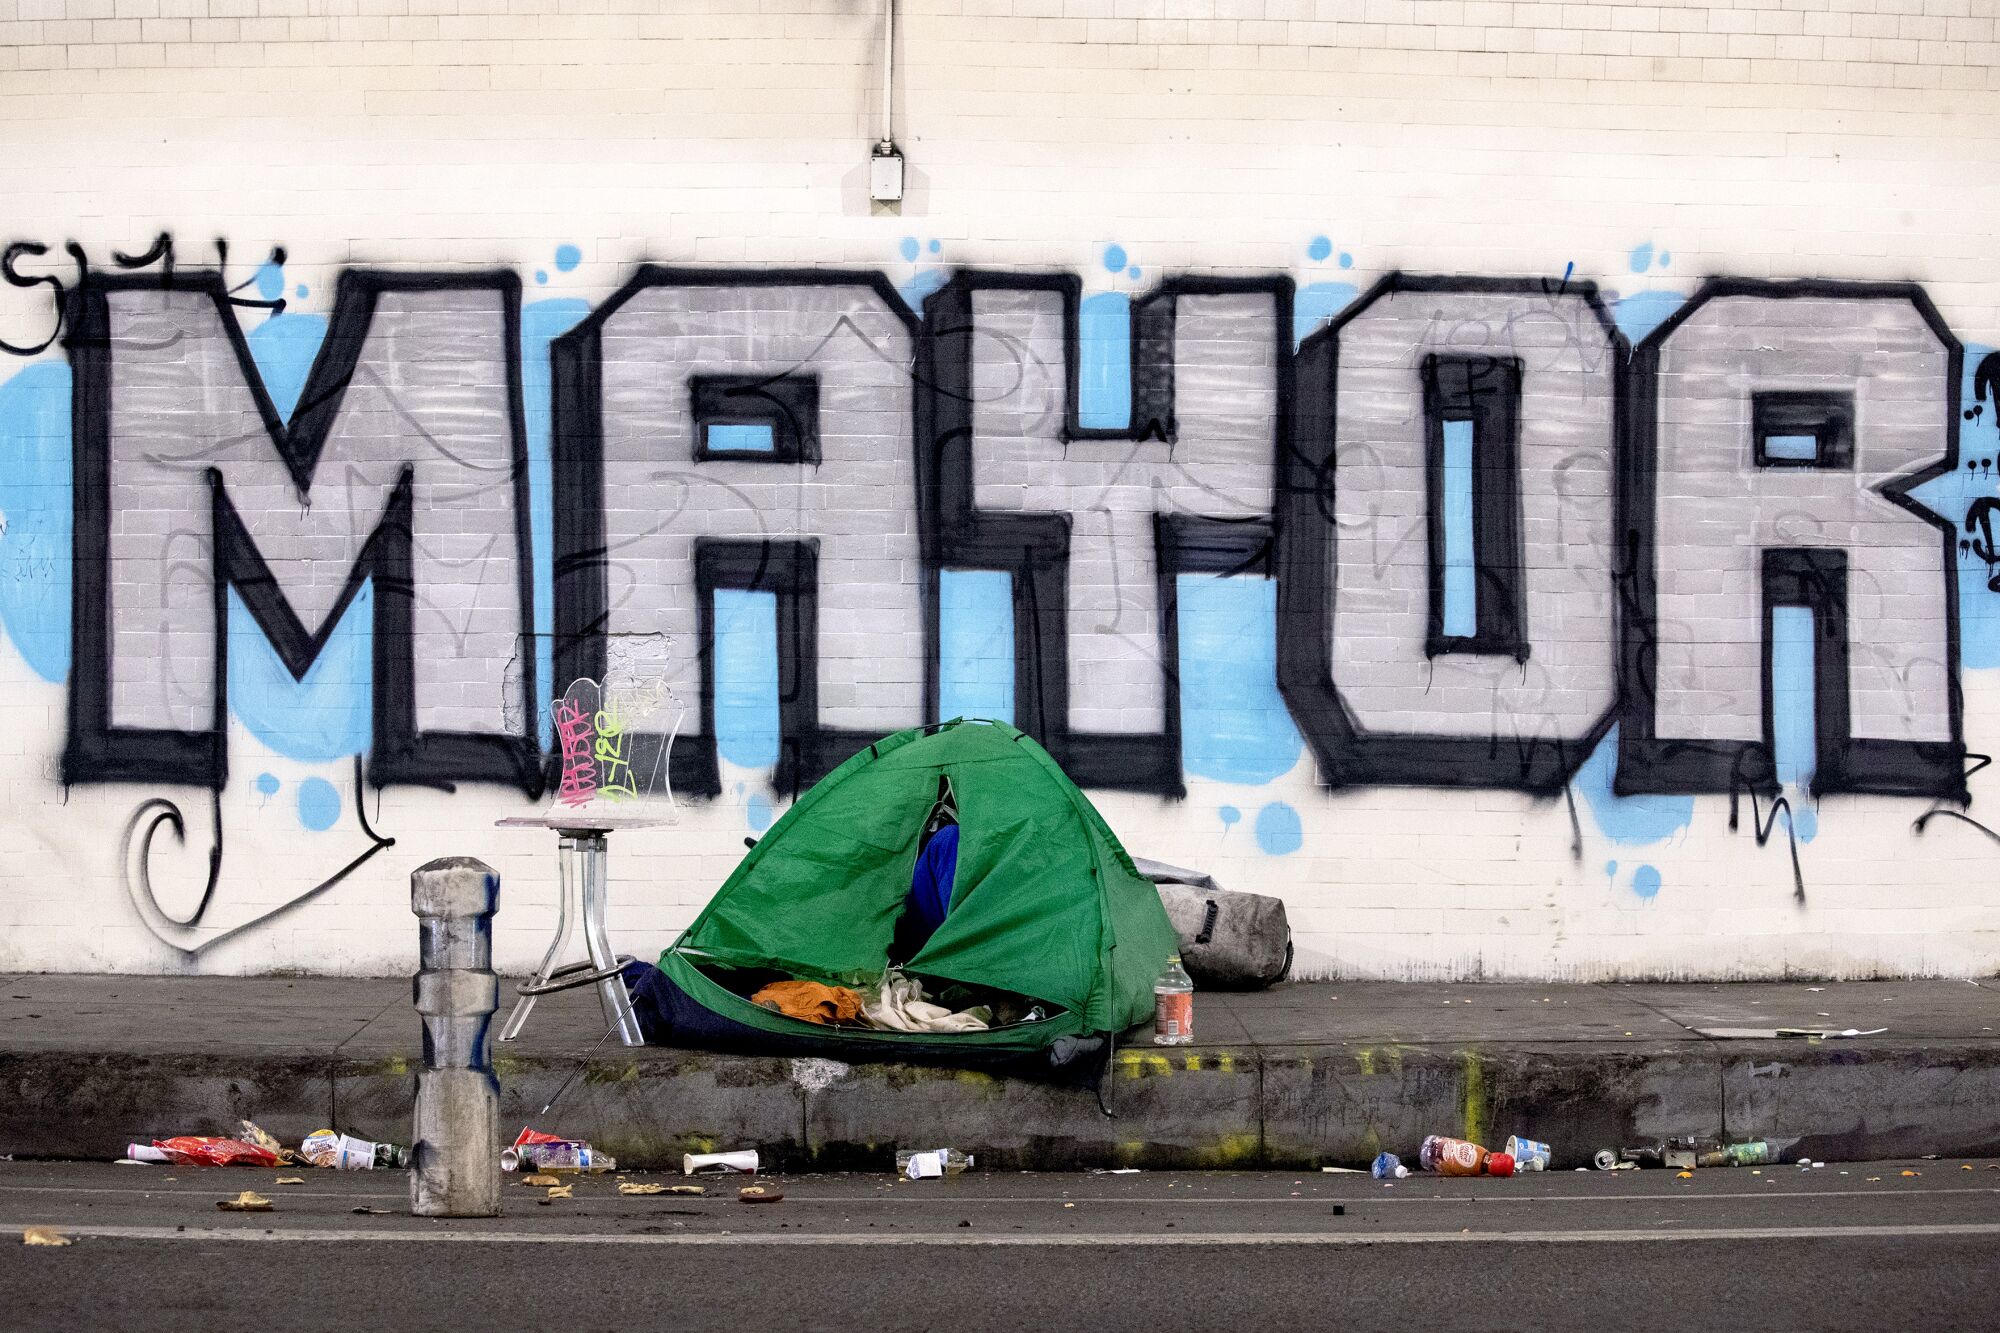 A tent, surrounded by litter, sits on the sidewalk. A large spray-painted sign behind reads "Mayor."